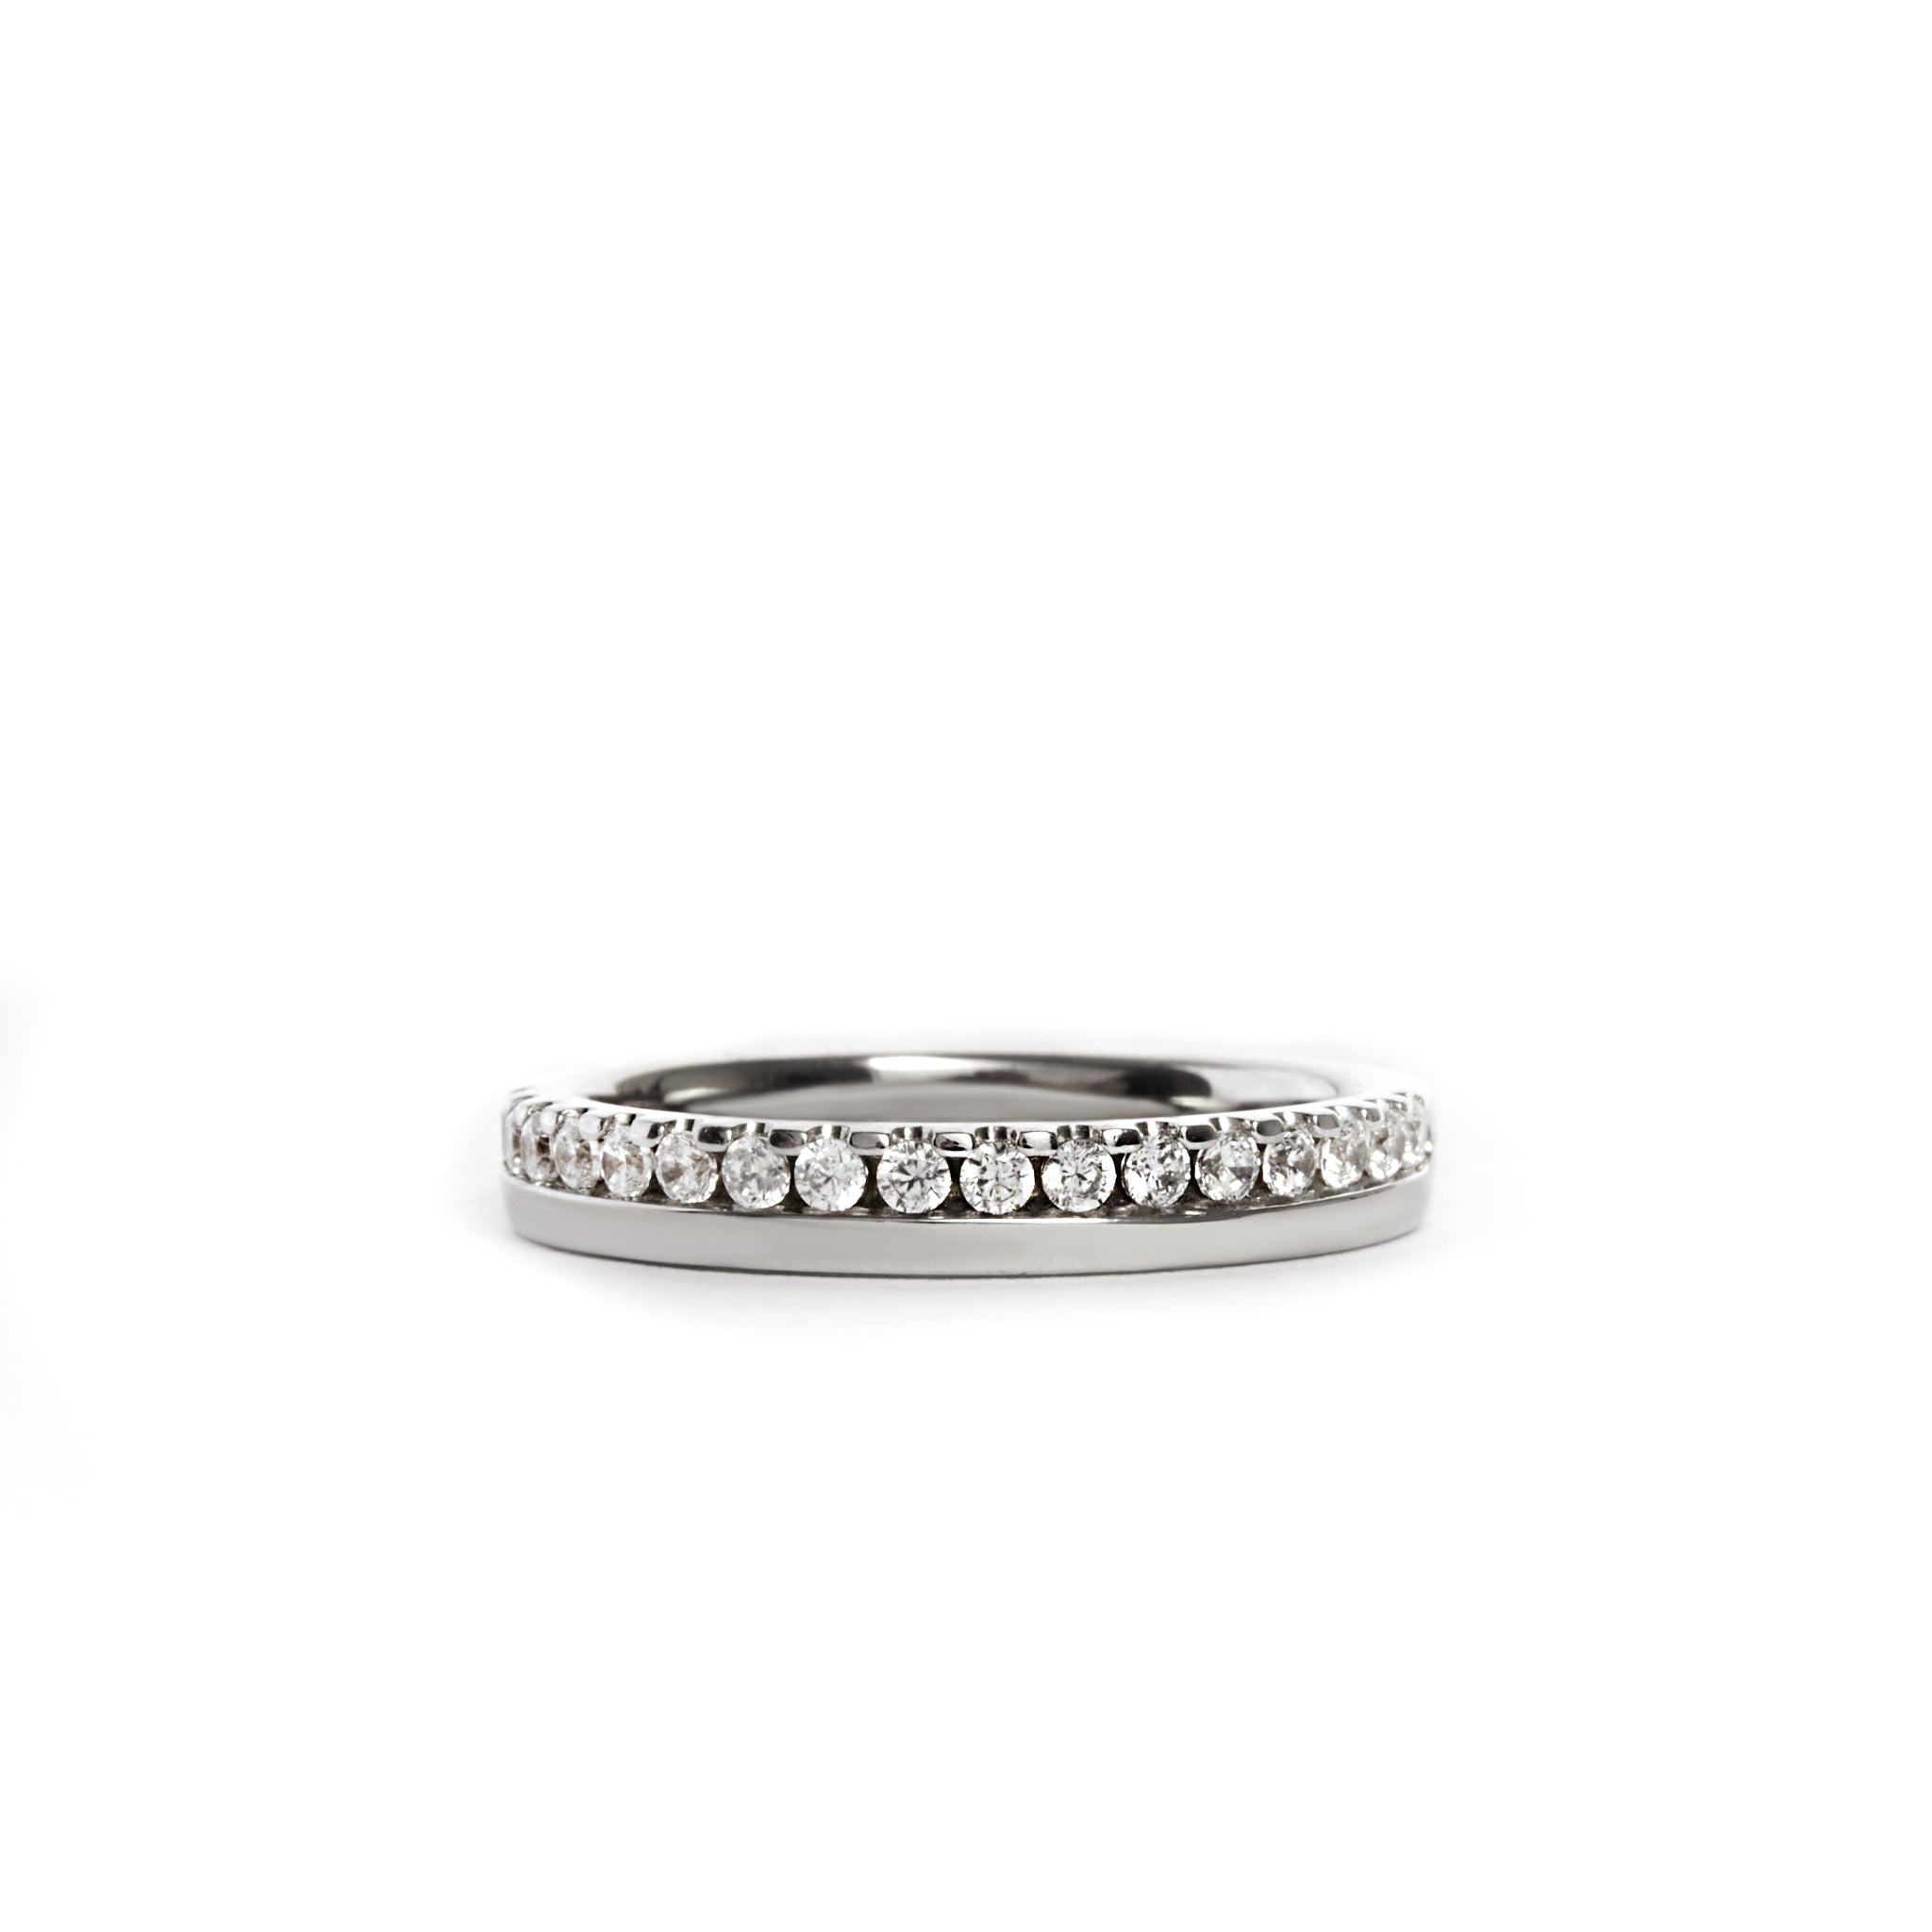 Stunning diamond ring crafted from 18ct White Gold, featuring Round Brilliant Cut Natural Diamonds in a Double Row design. Total Diamond Weight: 0.50ct. Available in Yellow Gold and Platinum. Made to Order